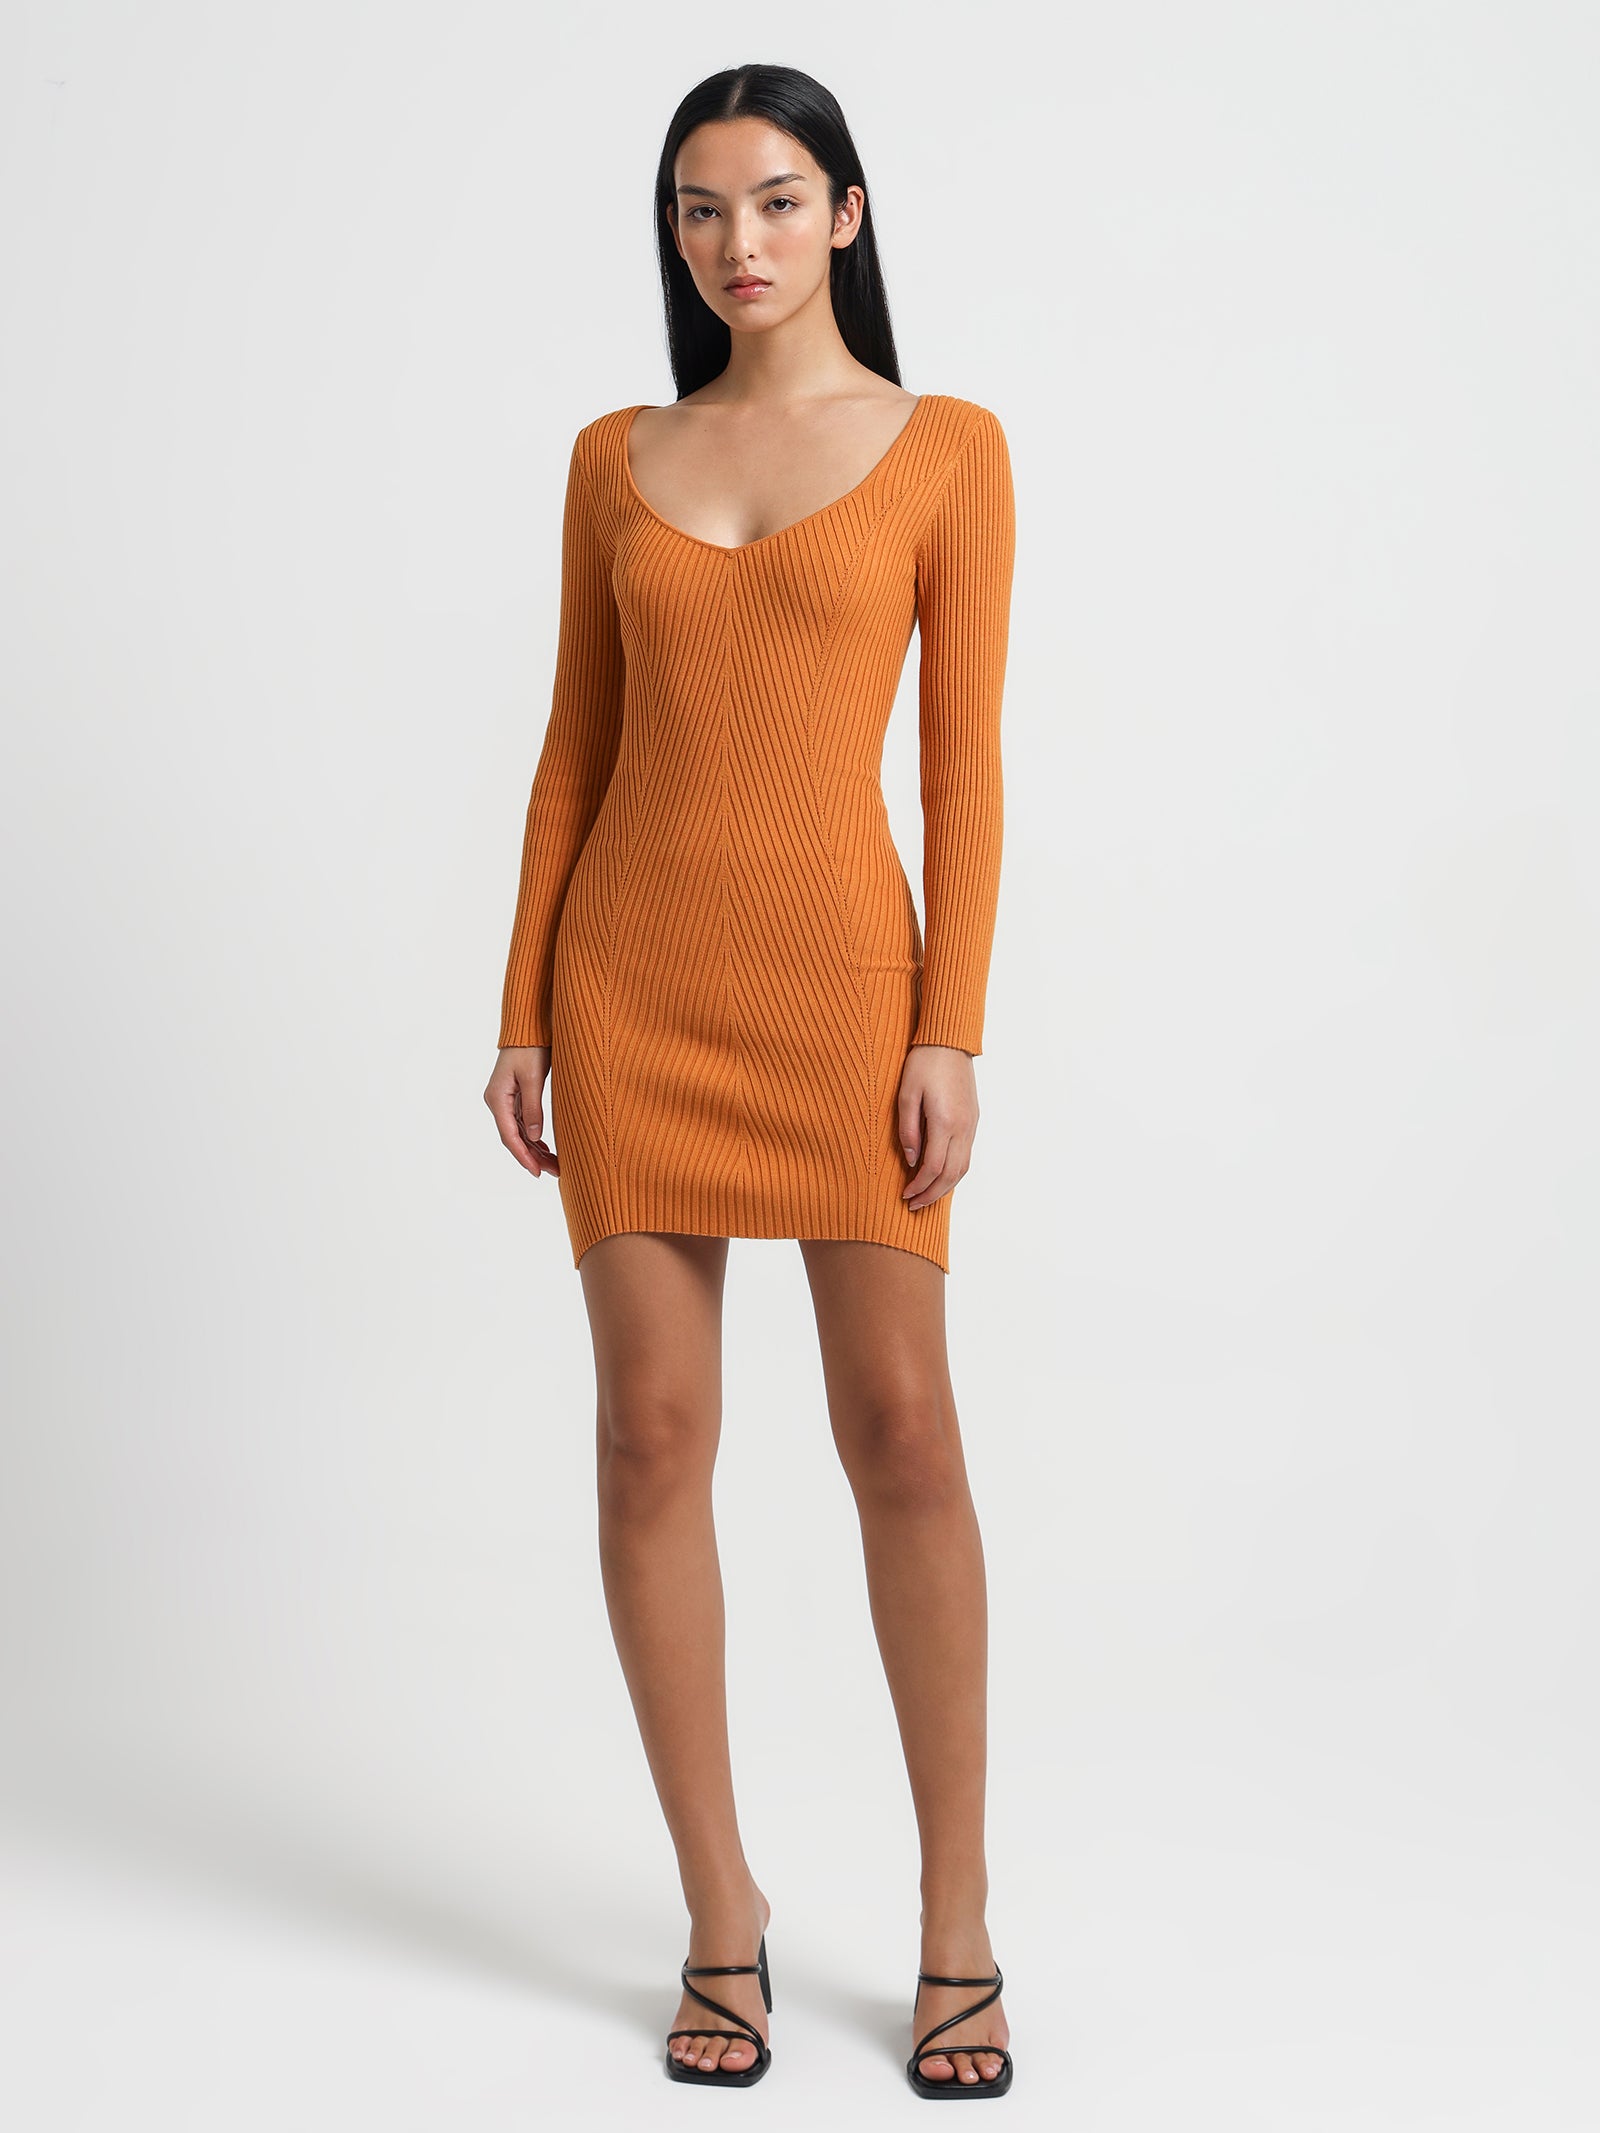 Elsa Knitted Dress in Marigold